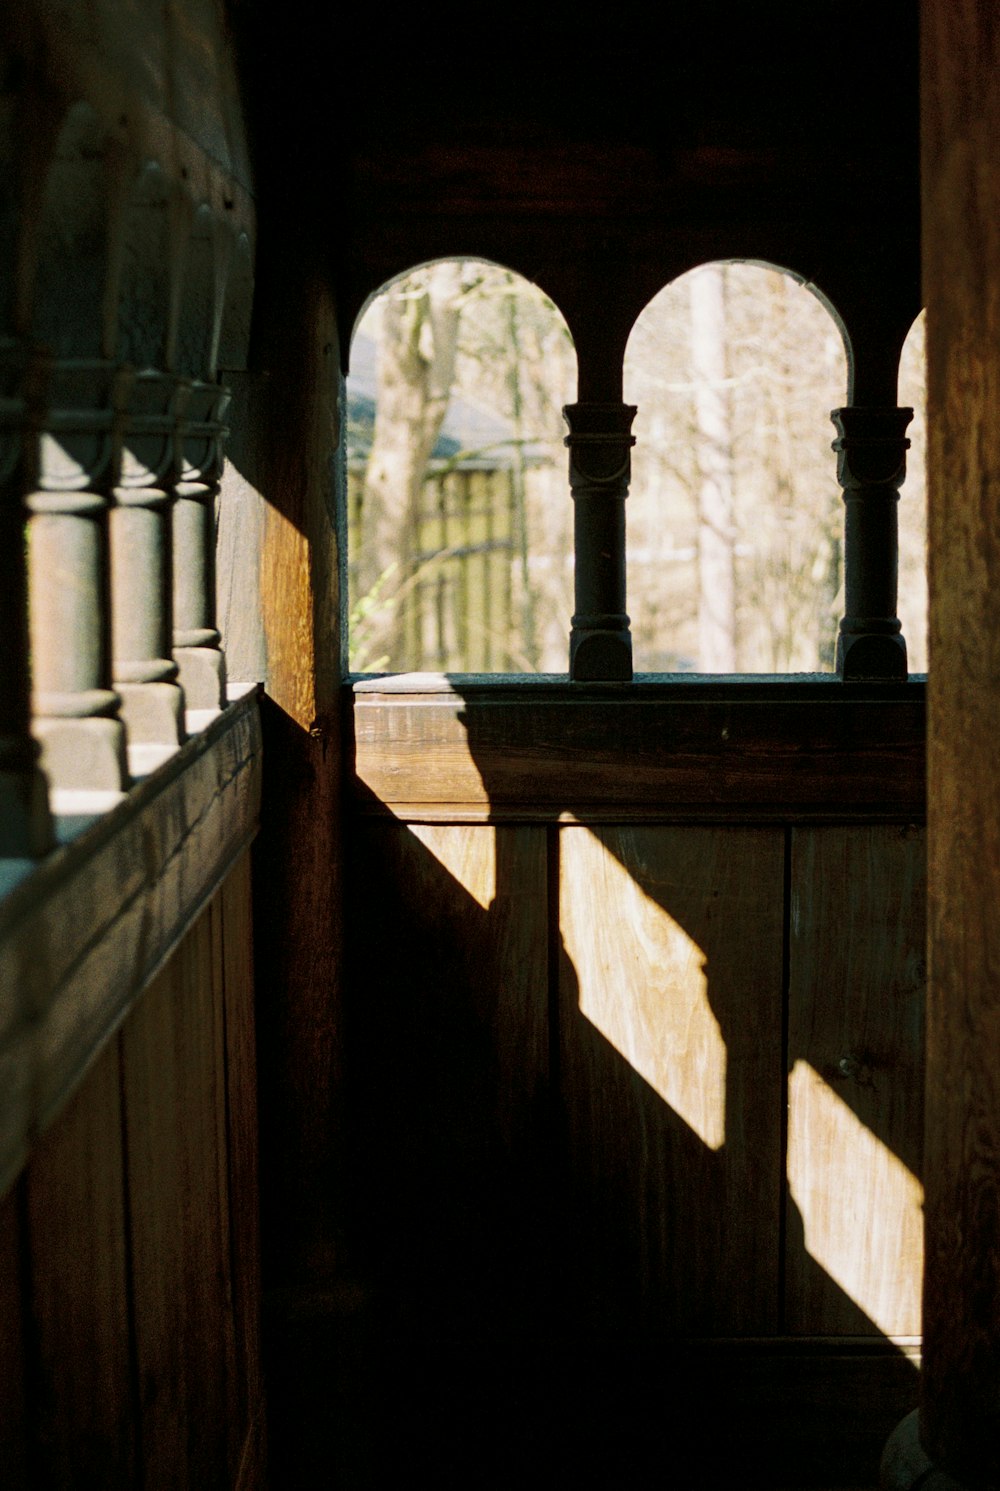 a view of the inside of a building through a window